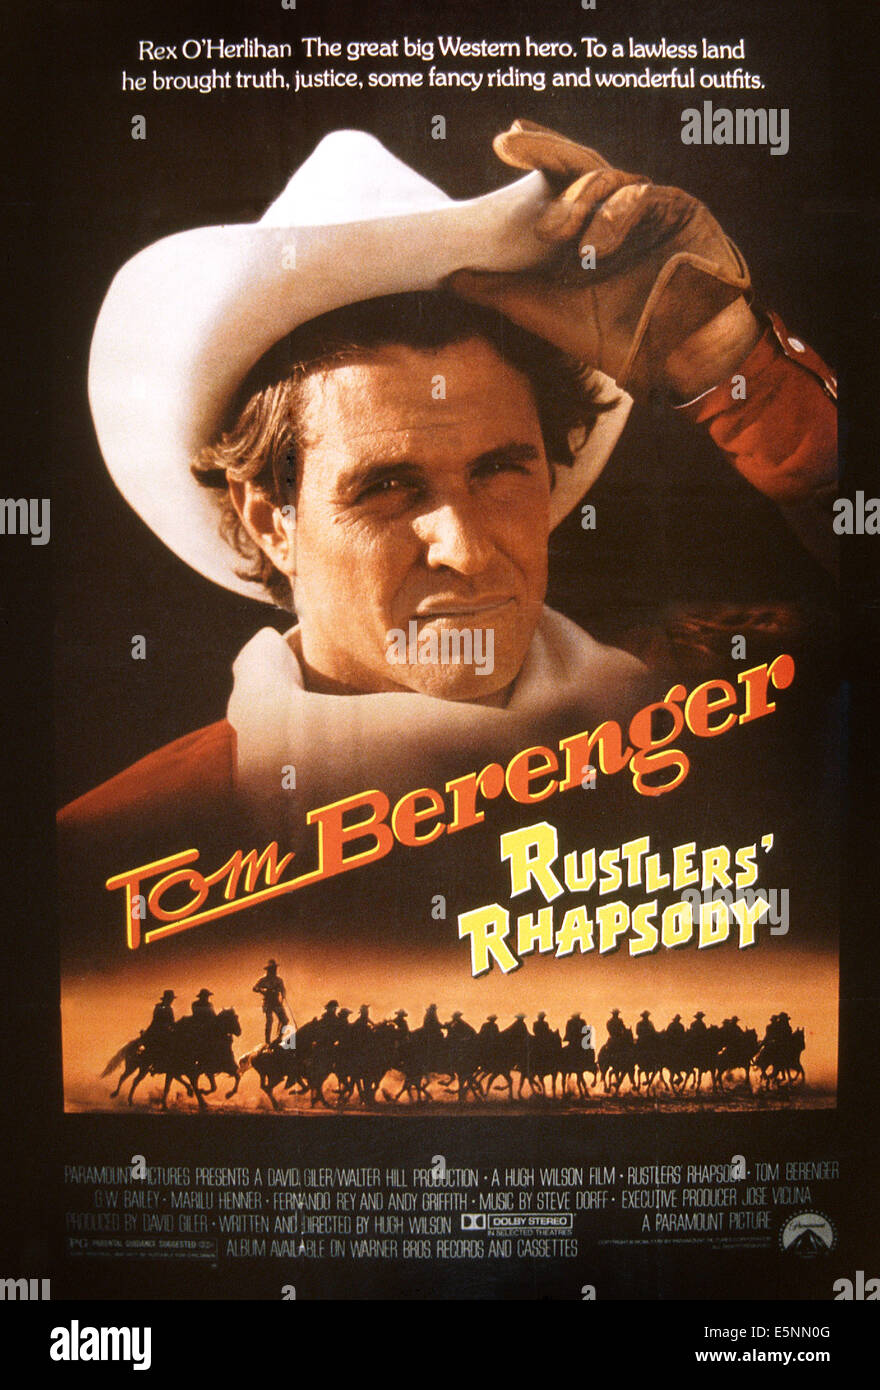 RUSTLERS' RHAPSODY, US poster, Tom Berenger, 1985, © Paramount/courtesy Everett Collection Stock Photo